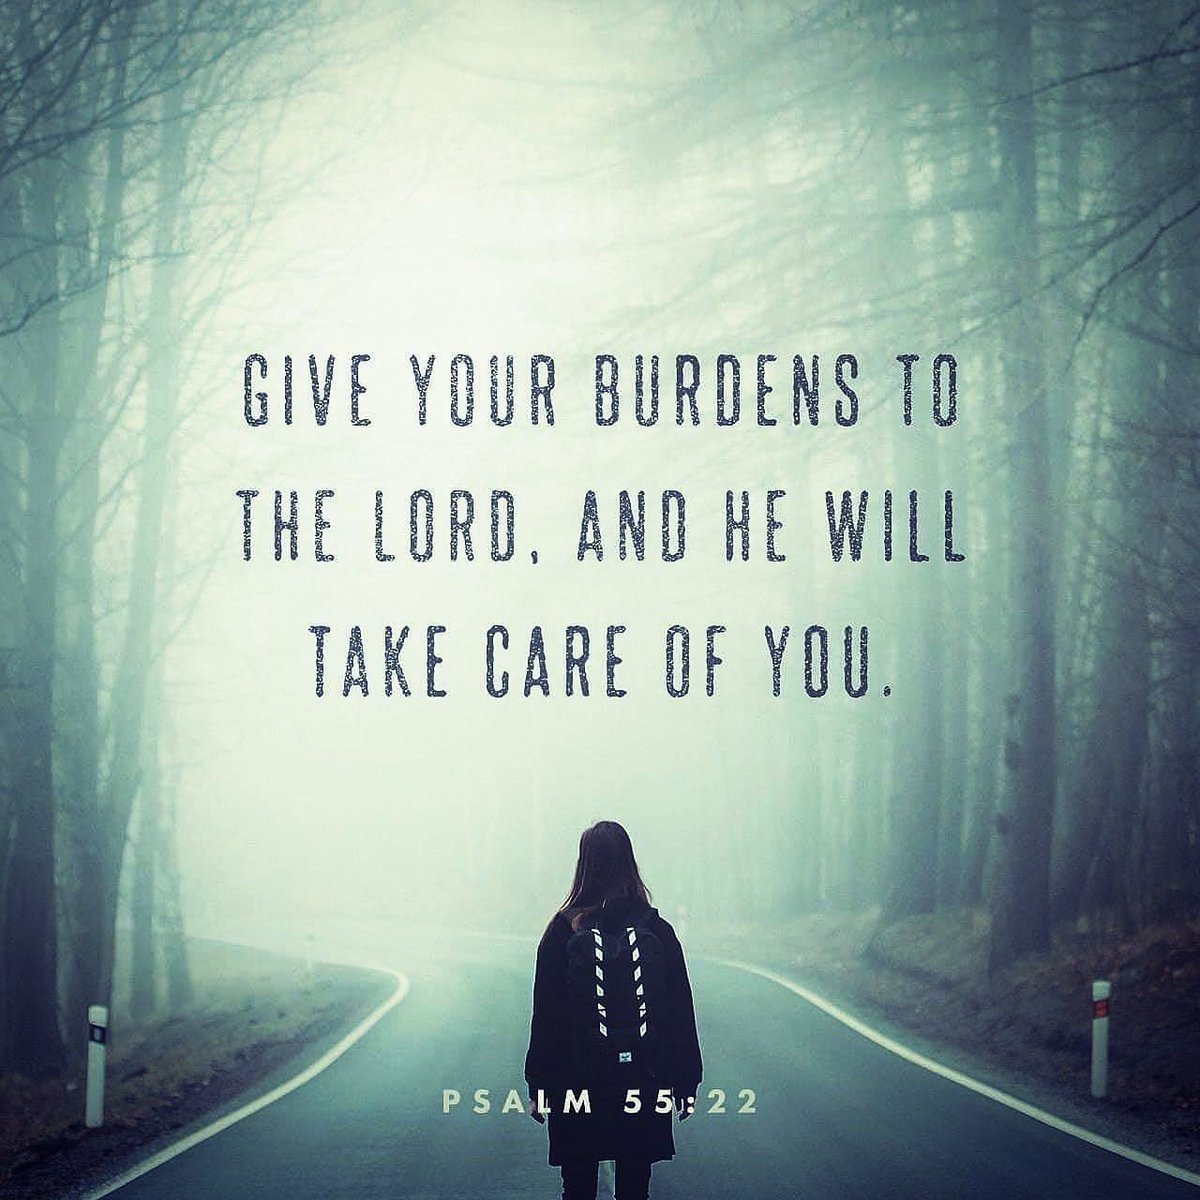 Give your burdens to God, and He will take care of you. ❤
#giveyourburdenstogod #godwilltakecareofyou #godiswithyou #youversion